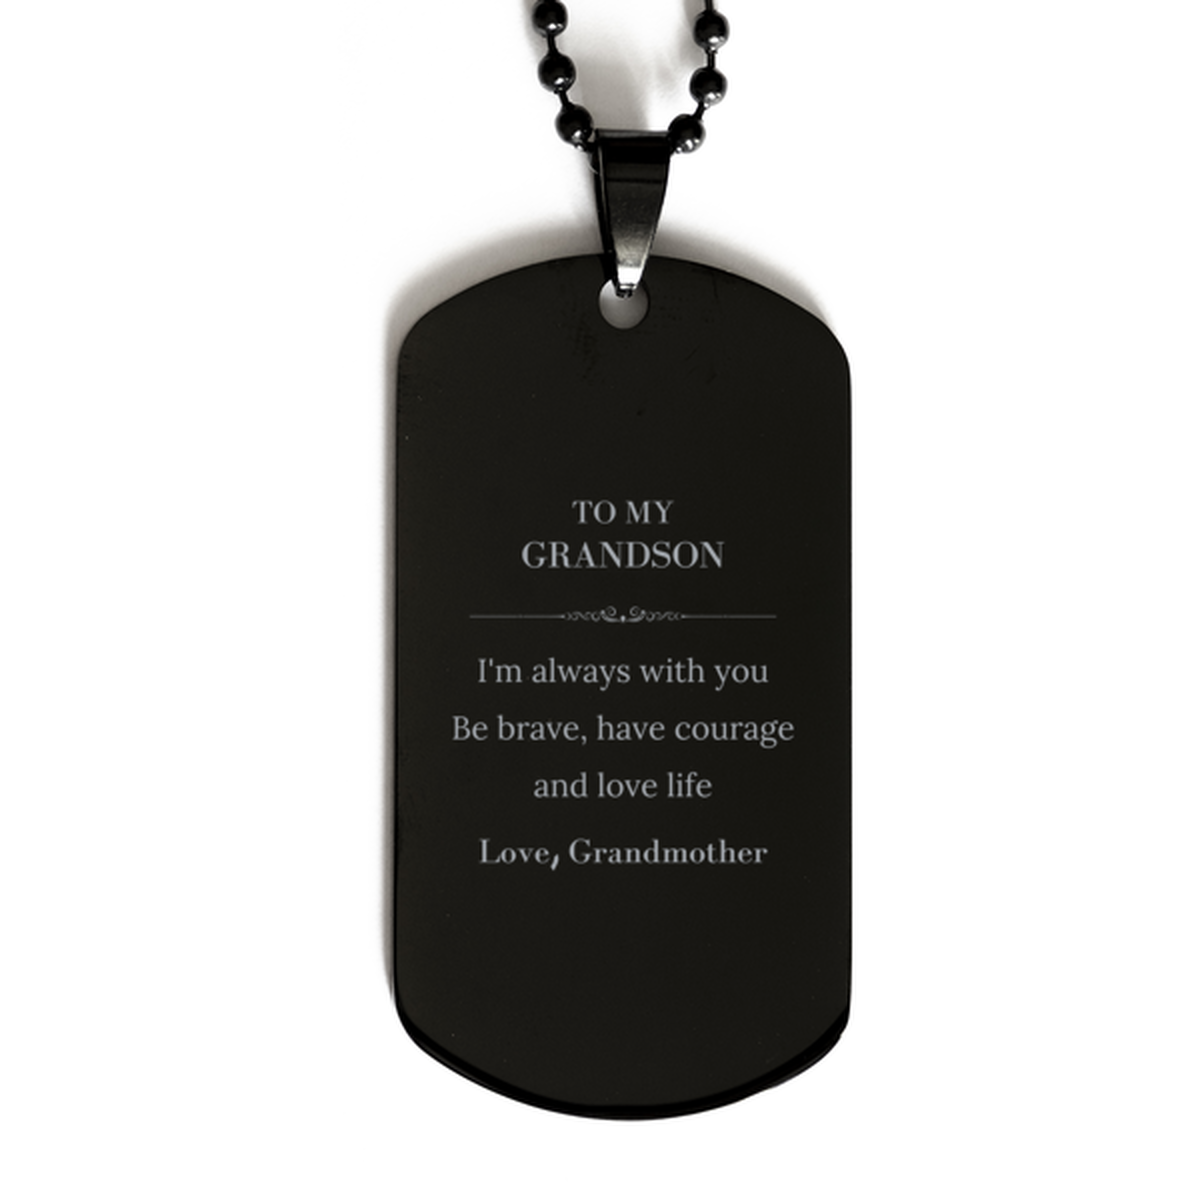 To My Grandson Gifts from Grandmother, Unique Black Dog Tag Inspirational Christmas Birthday Graduation Gifts for Grandson I'm always with you. Be brave, have courage and love life. Love, Grandmother